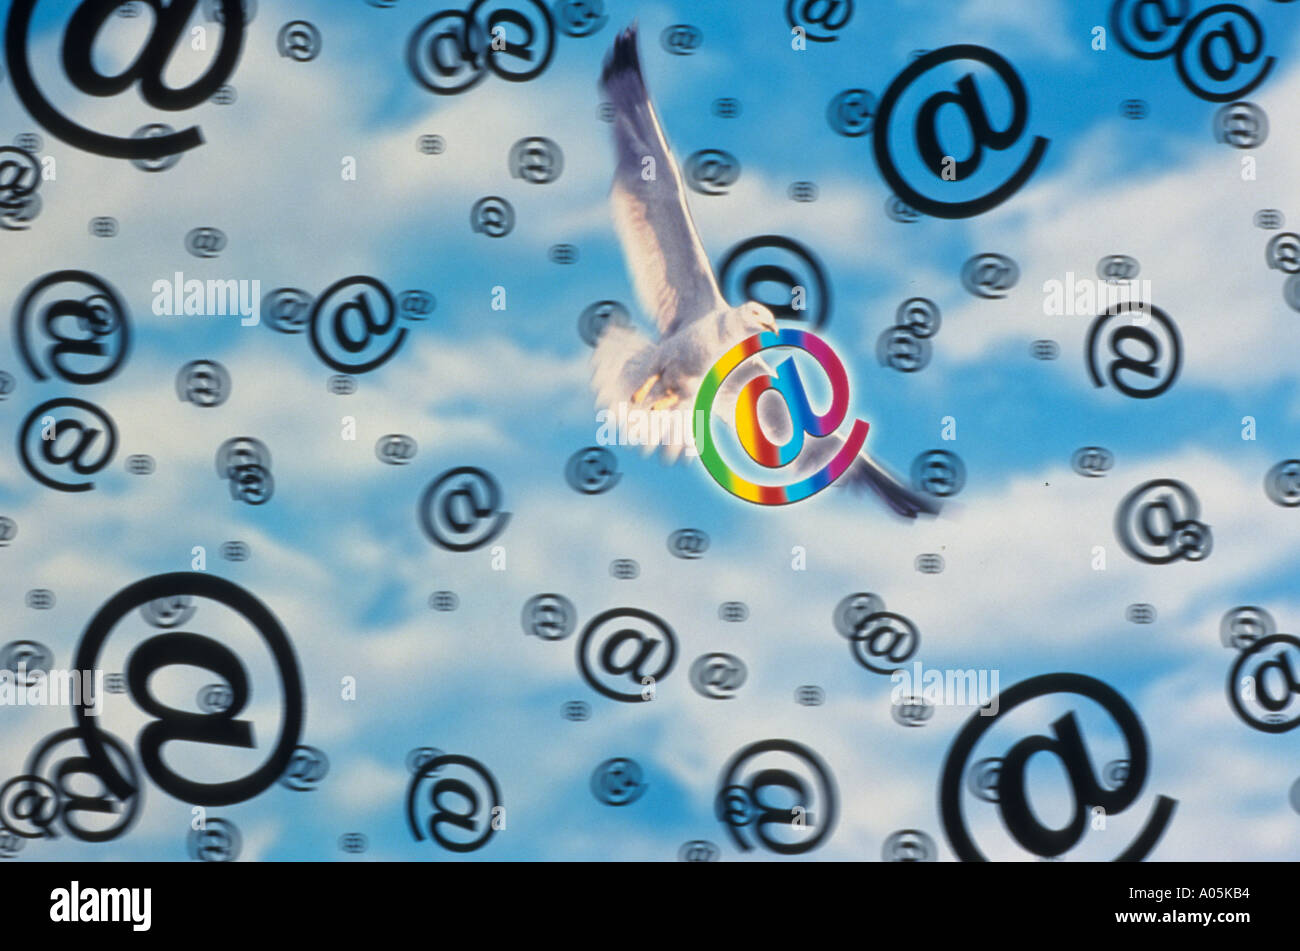 Conceptual illustration of a white dove flying amongst the clouds and the internet symbol denoting the at sign Stock Photo